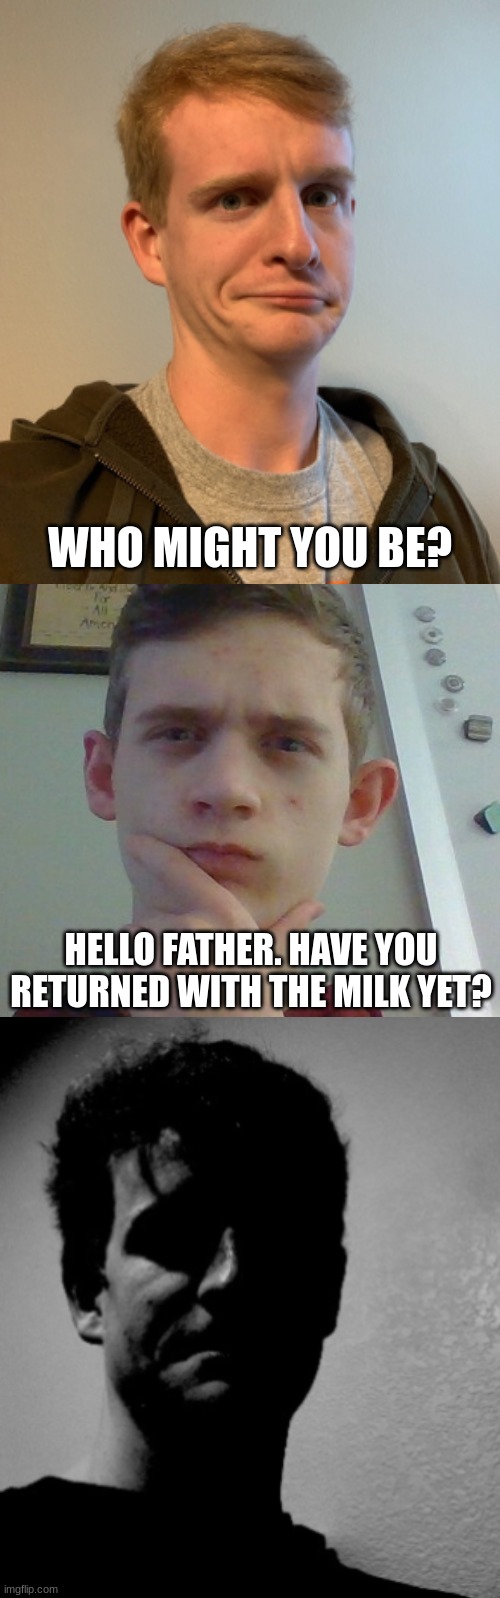 WHO MIGHT YOU BE? HELLO FATHER. HAVE YOU RETURNED WITH THE MILK YET? | image tagged in thelargepig confused,thelargepig becoming slightly uncanny extended | made w/ Imgflip meme maker